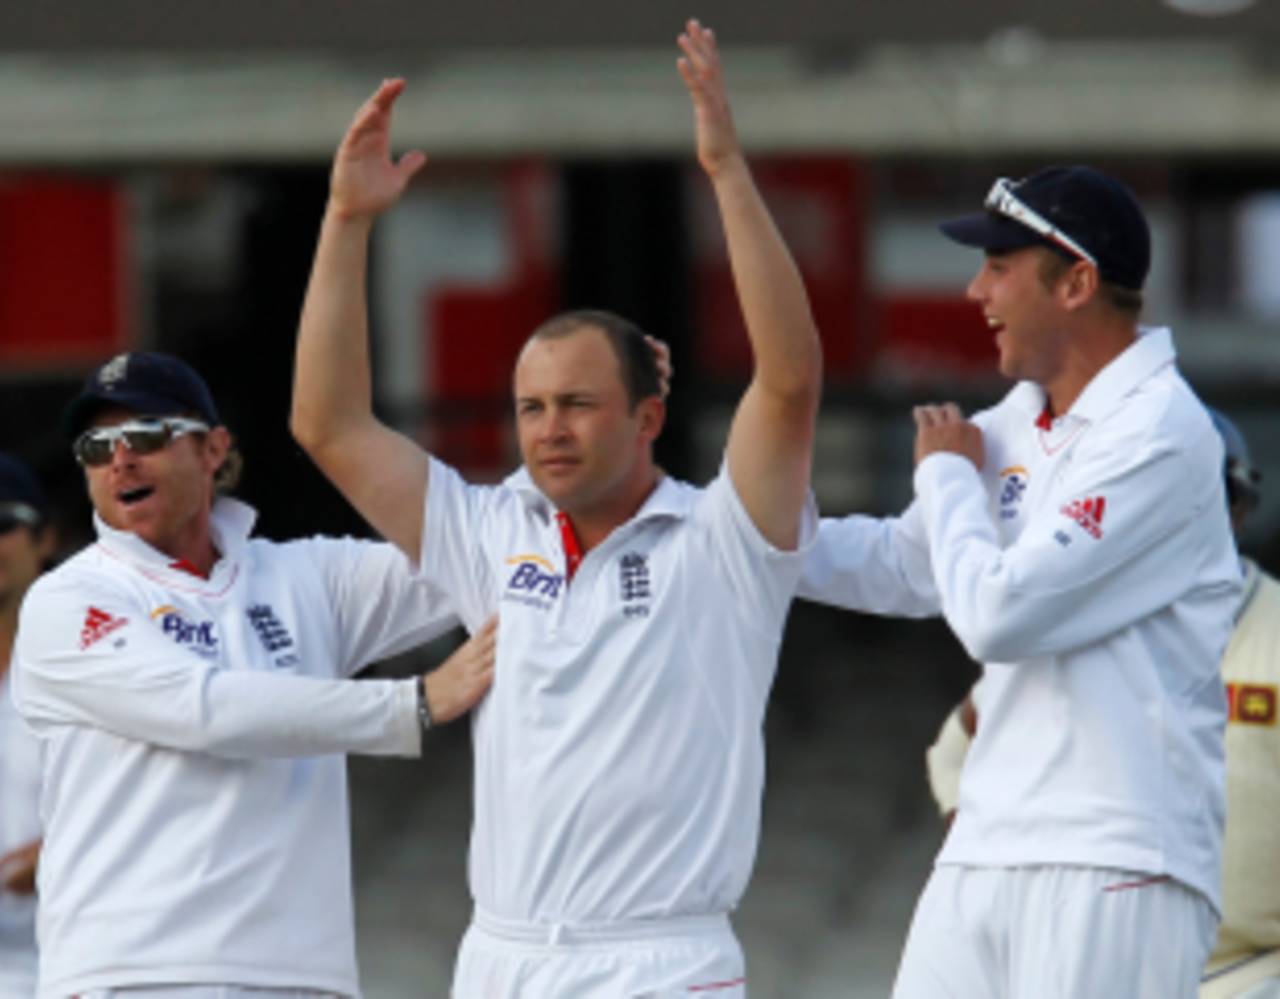 Jonathan Trott puts both his hands up when Andrew Strauss asks for volunteers to participate the Guinness World Records' longest "left alone" contest&nbsp;&nbsp;&bull;&nbsp;&nbsp;Getty Images